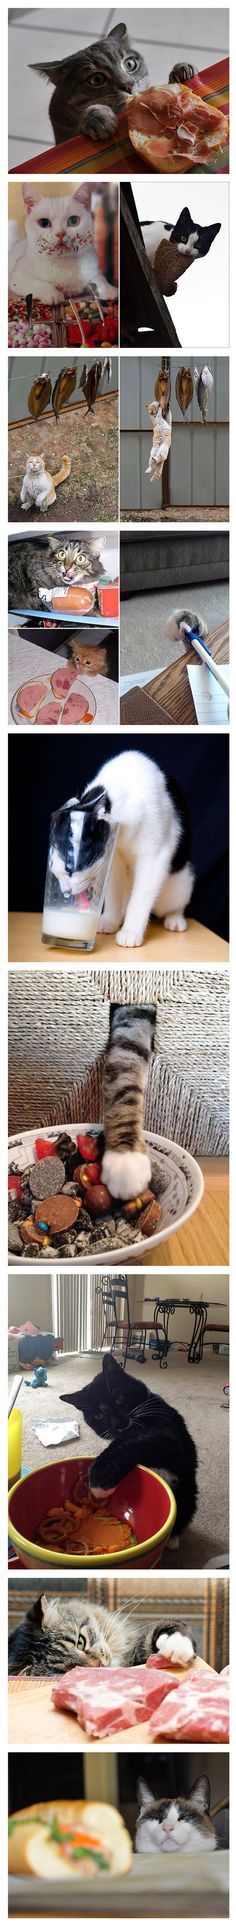 I Are SNEAKY! <a class="pintag" href="/explore/cats/" title="#cats explore Pinterest">#cats</a>